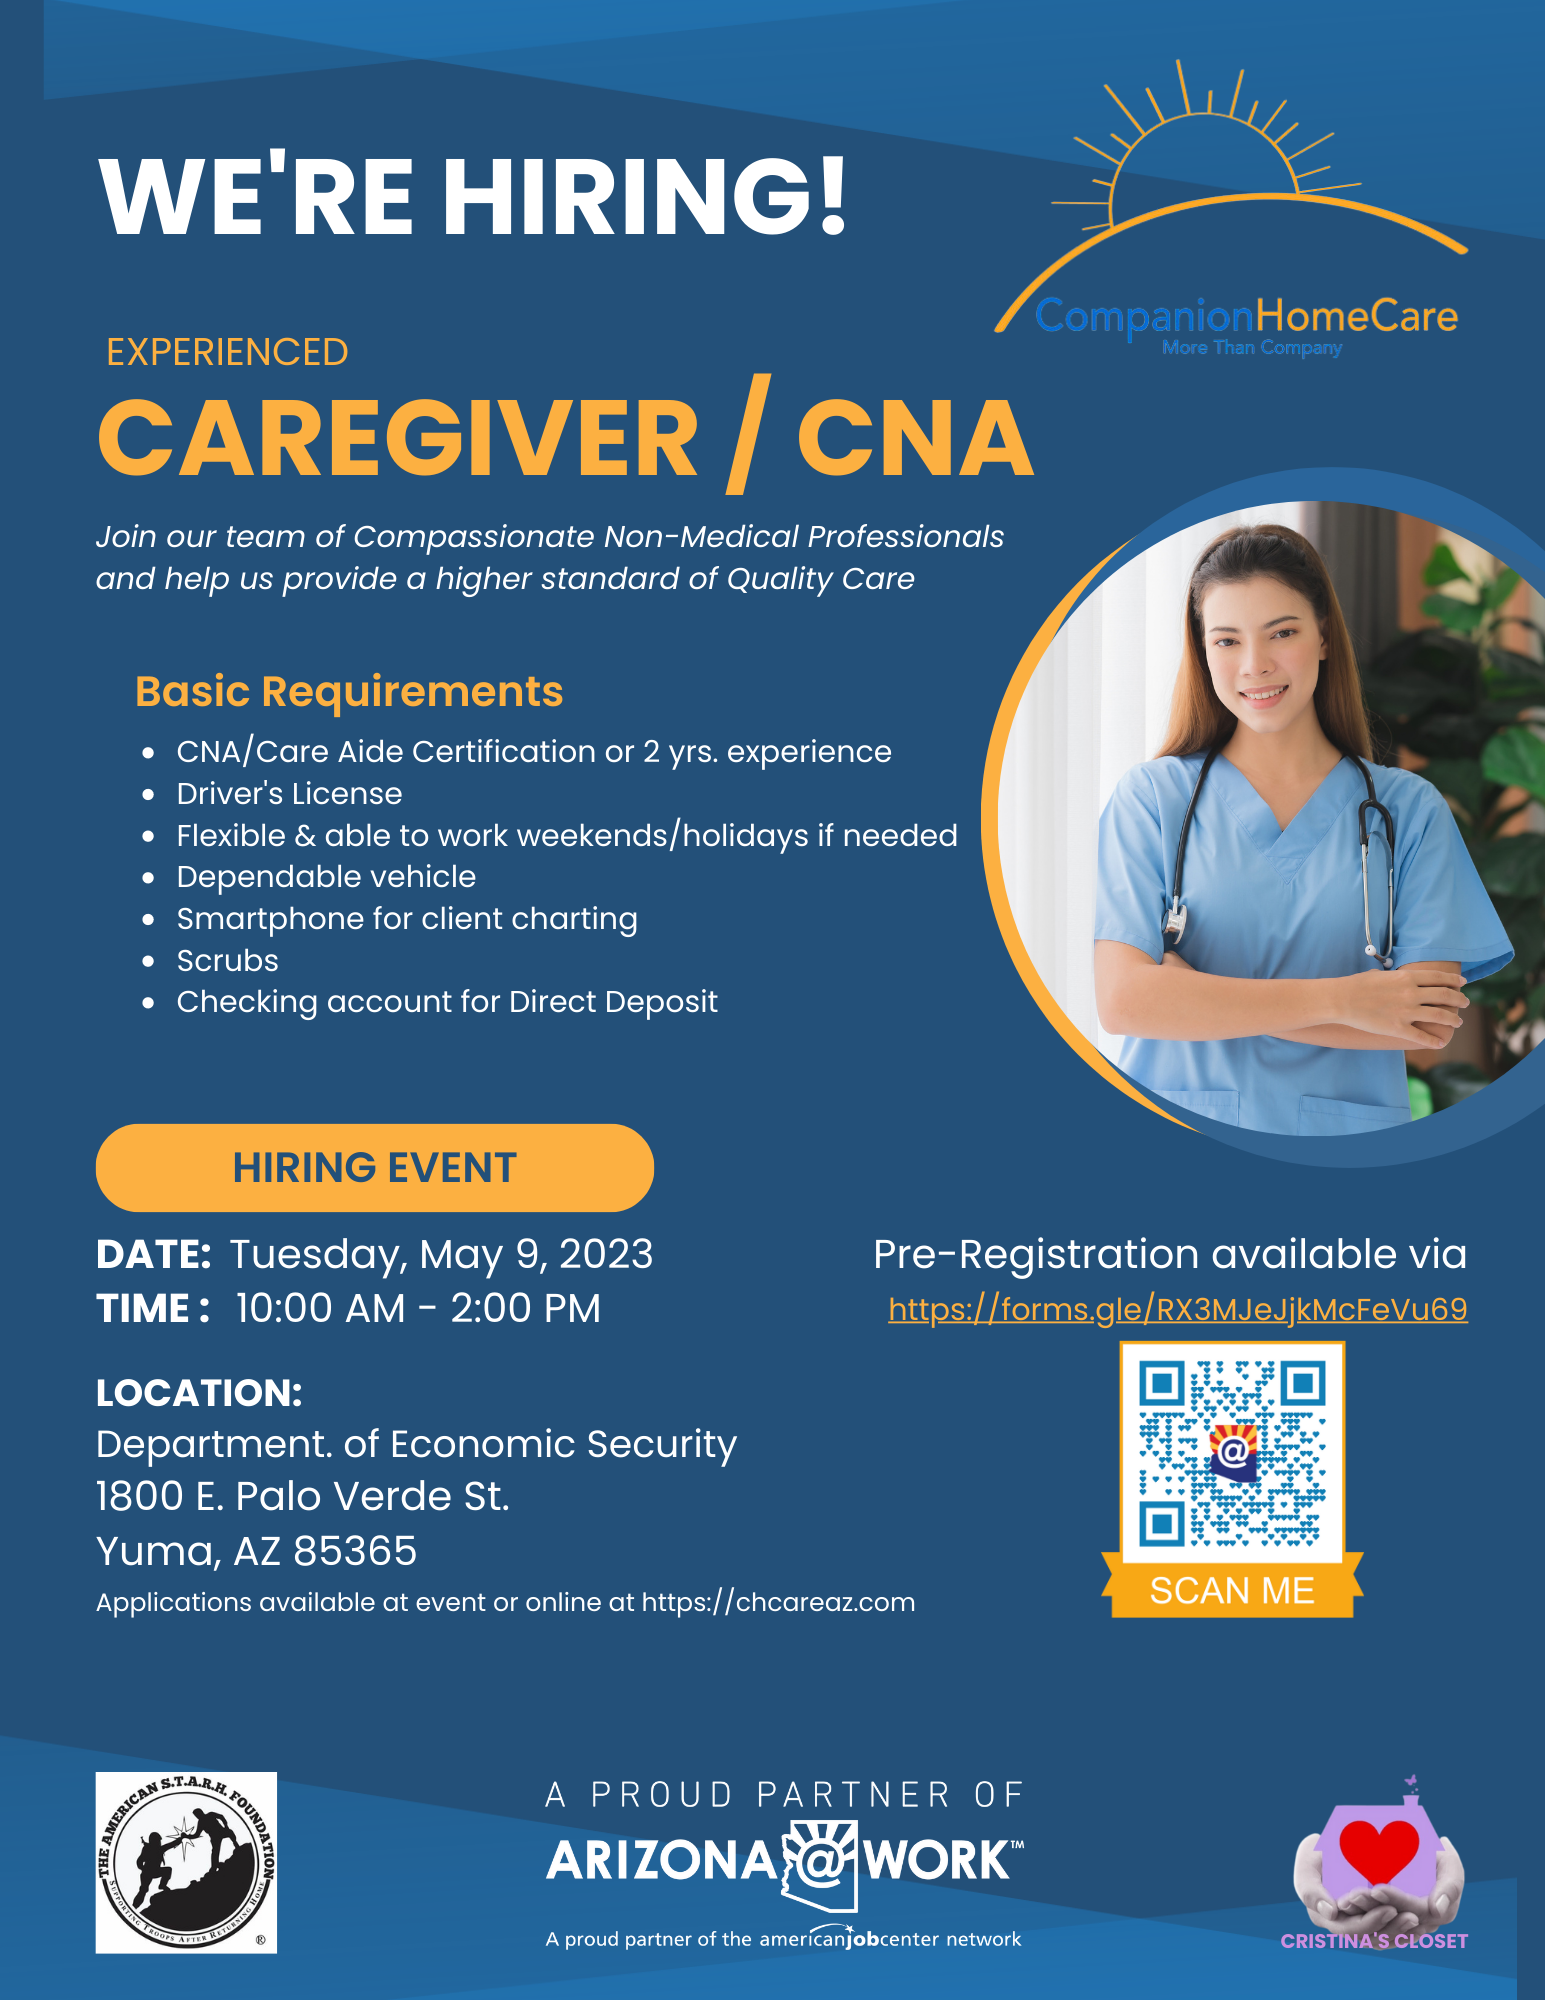 Companion Home Care - Hiring Event - May 9, 2023